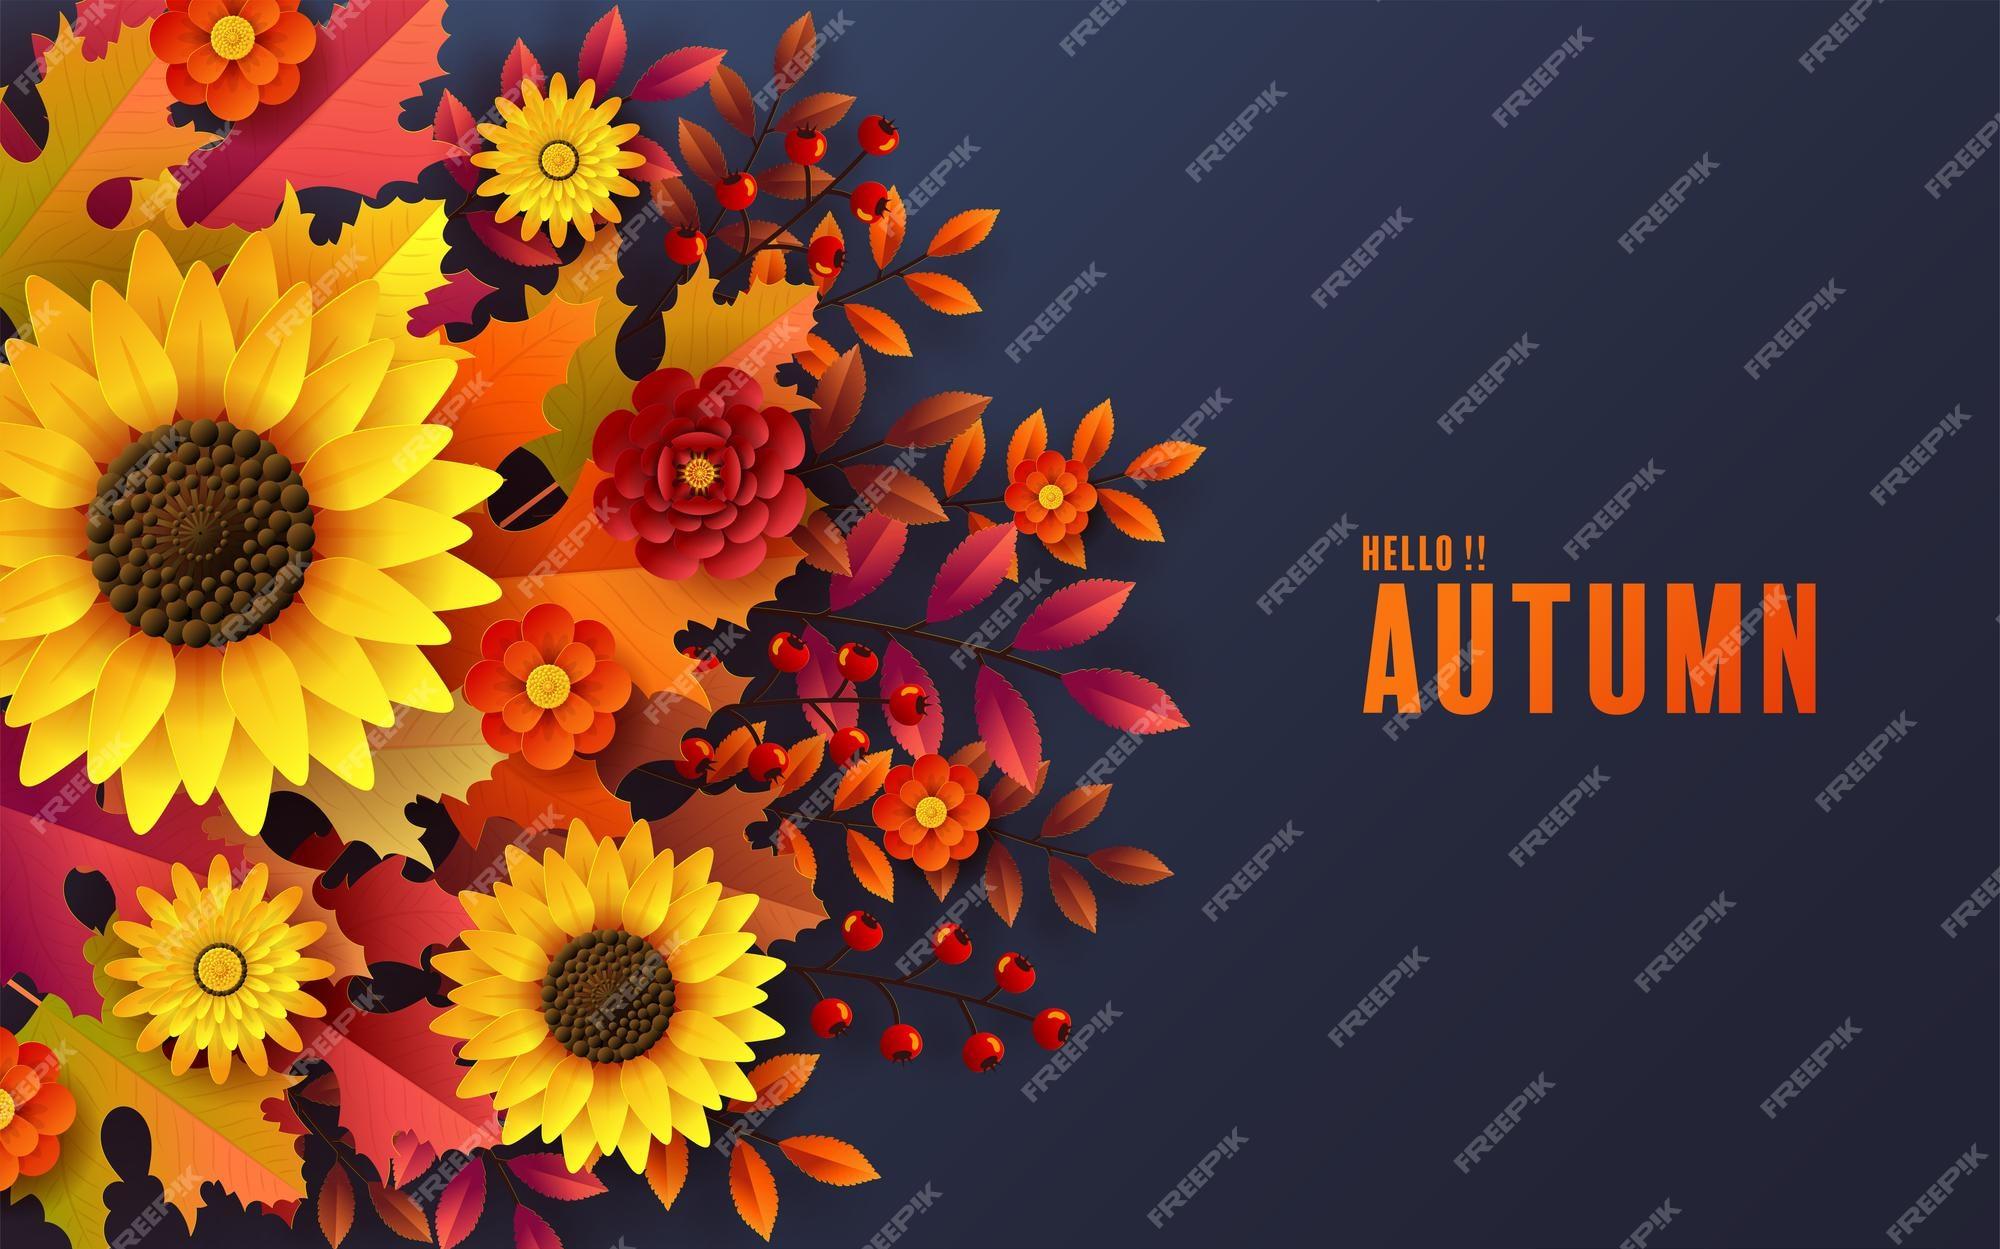 Premium Vector Autumn Holiday Seasonal Background With Colorful